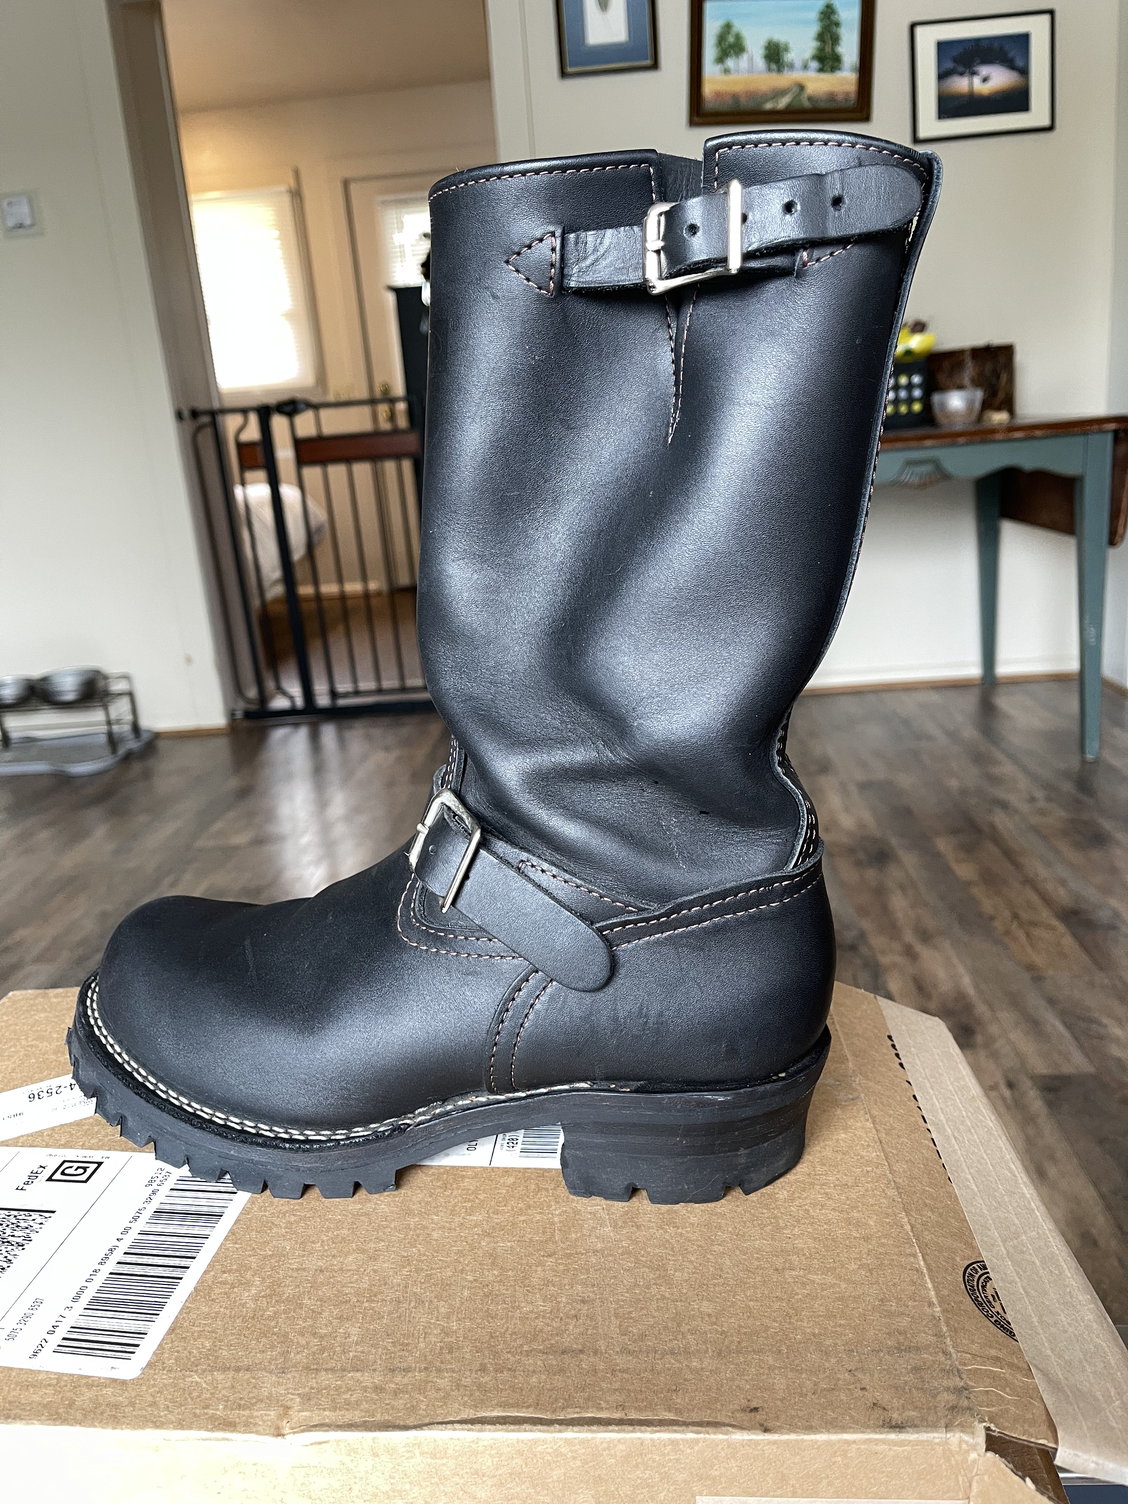 Wesco Boss Motorcycle Boots   Harley Davidson Forums